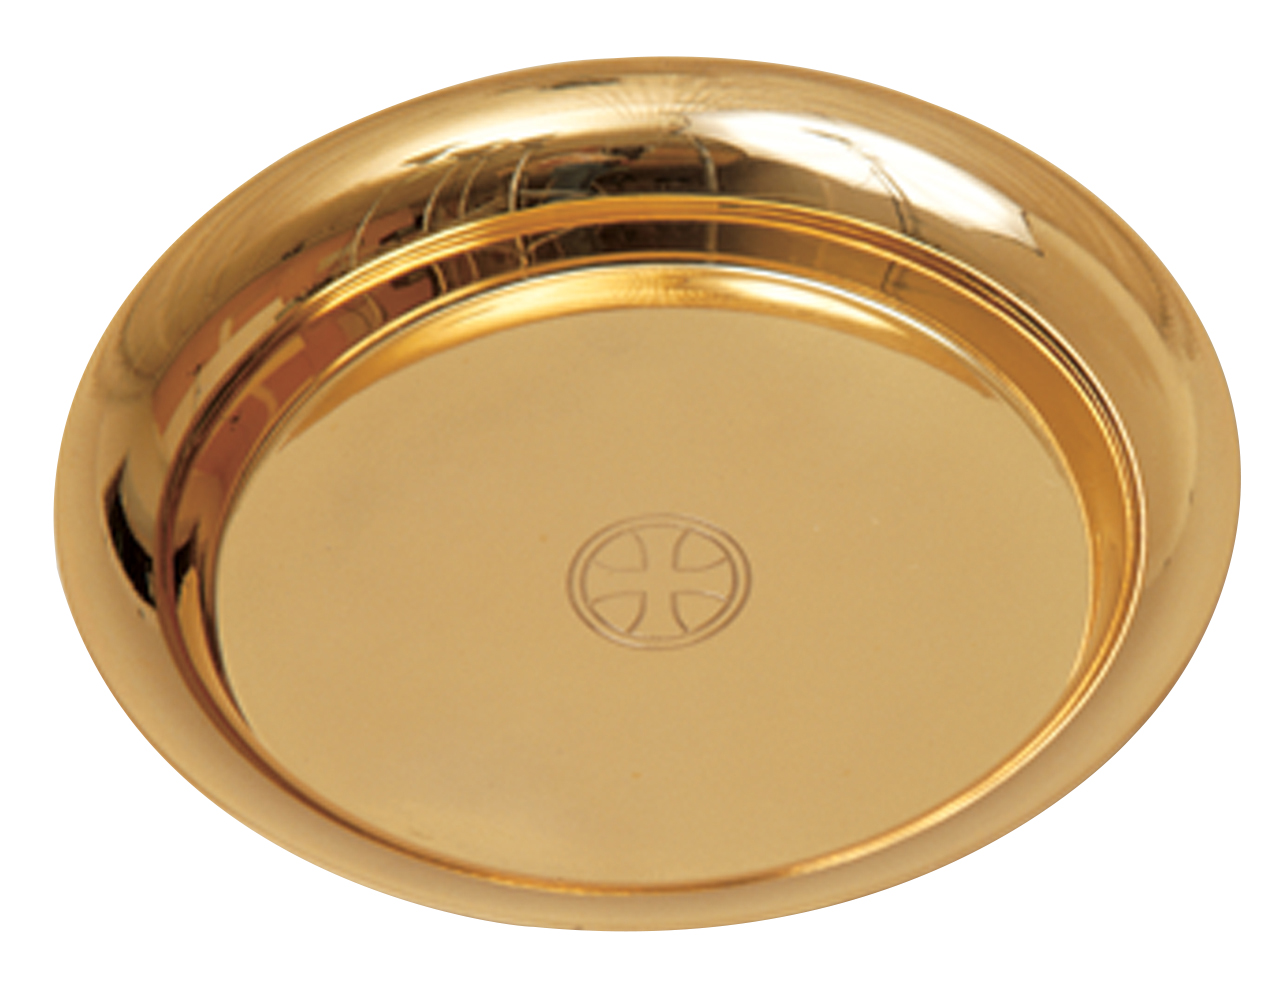 Ring Tray 24K Gold Plate